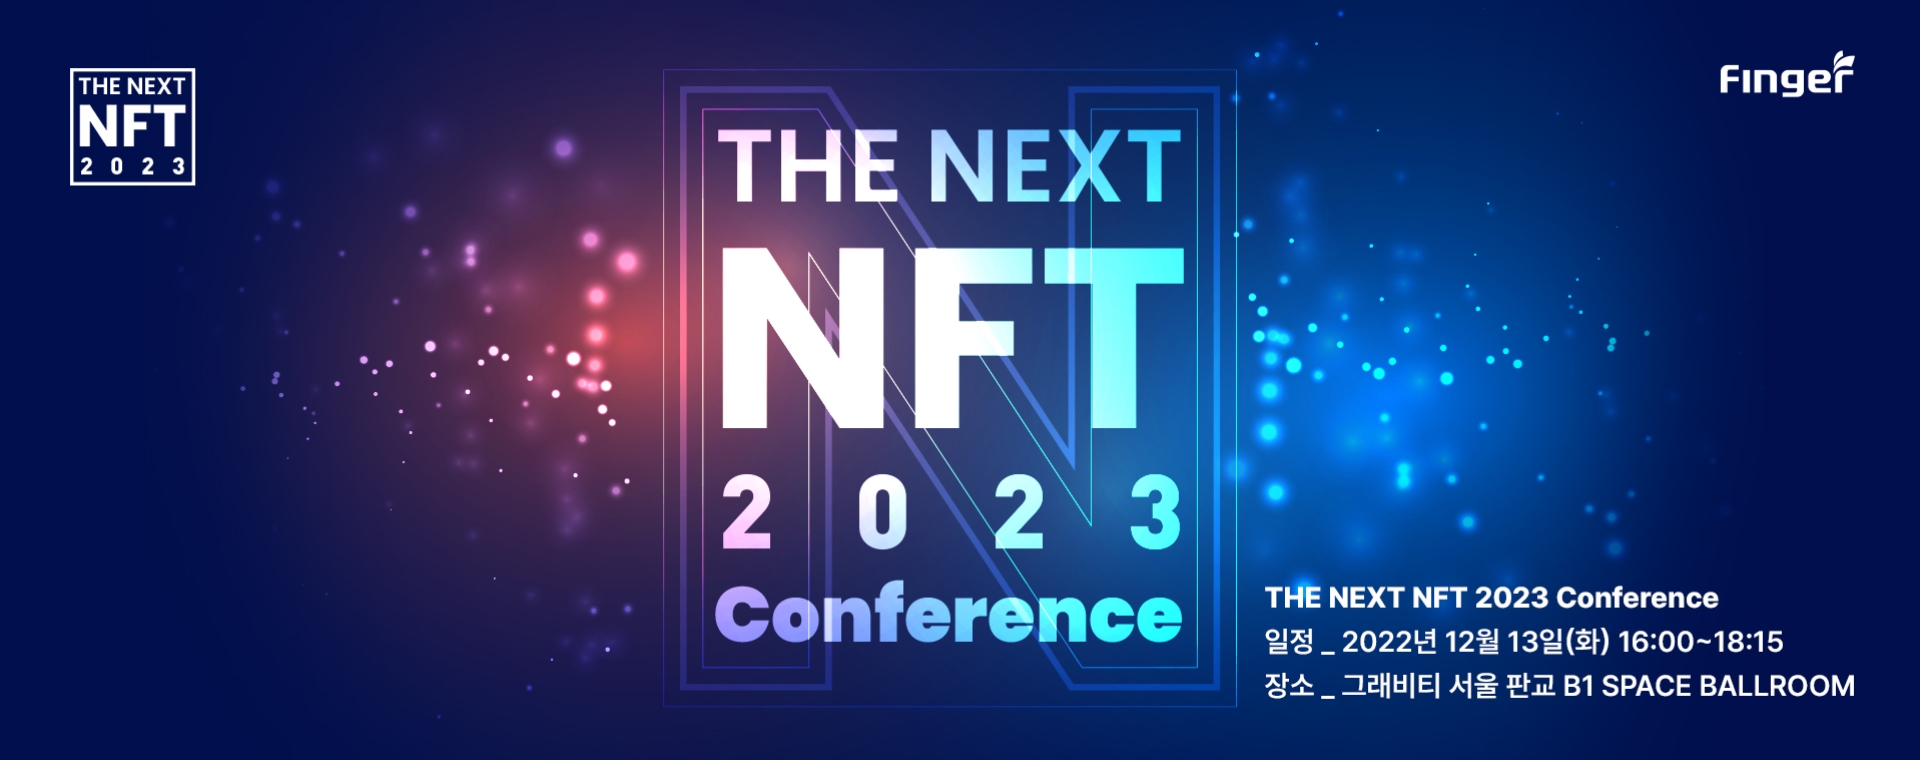 THE NEXT NFT 2023 Conference